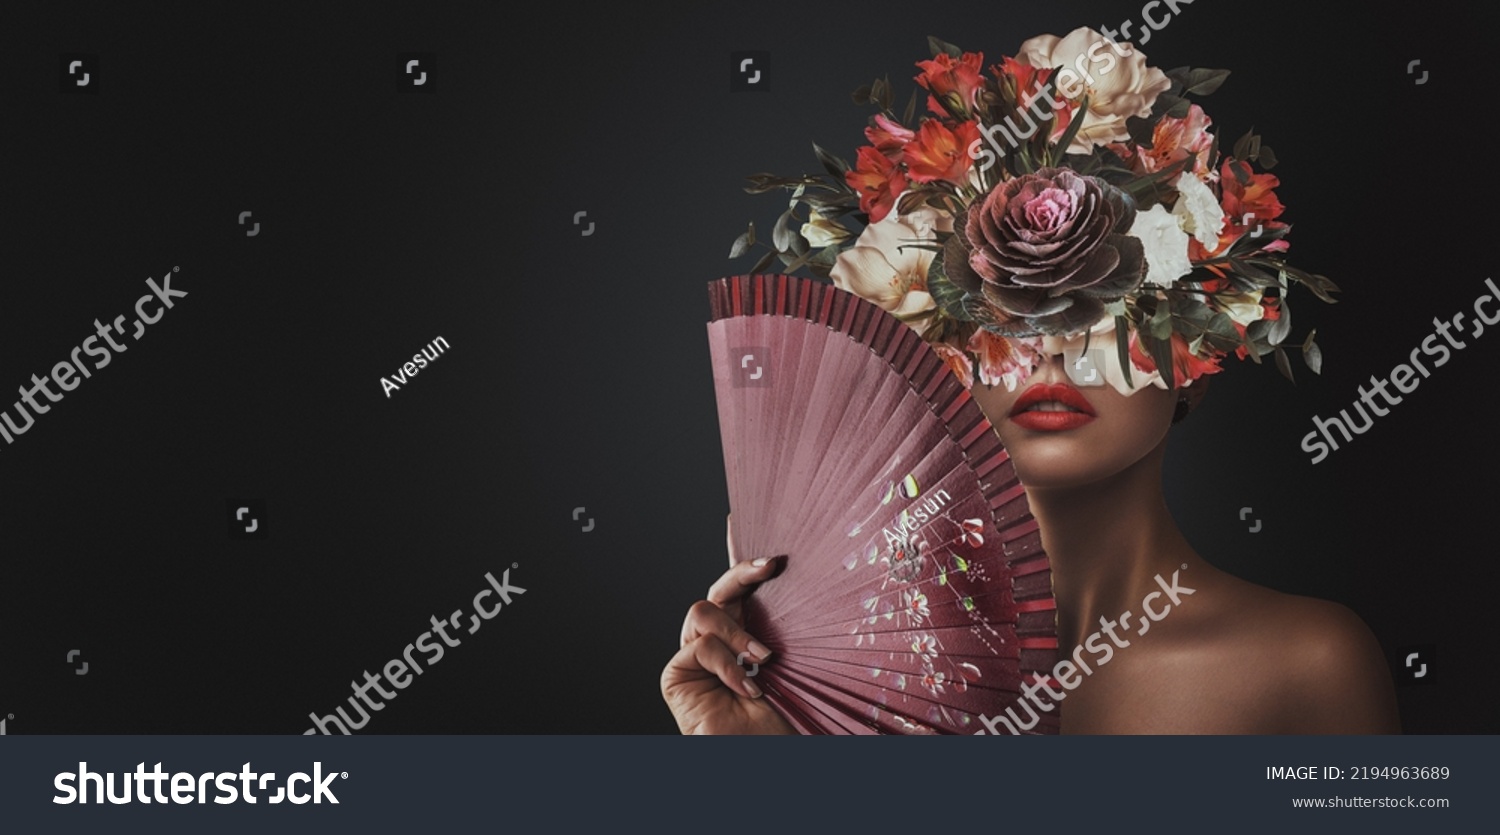 Abstract contemporary art collage portrait of young woman with flowers #2194963689